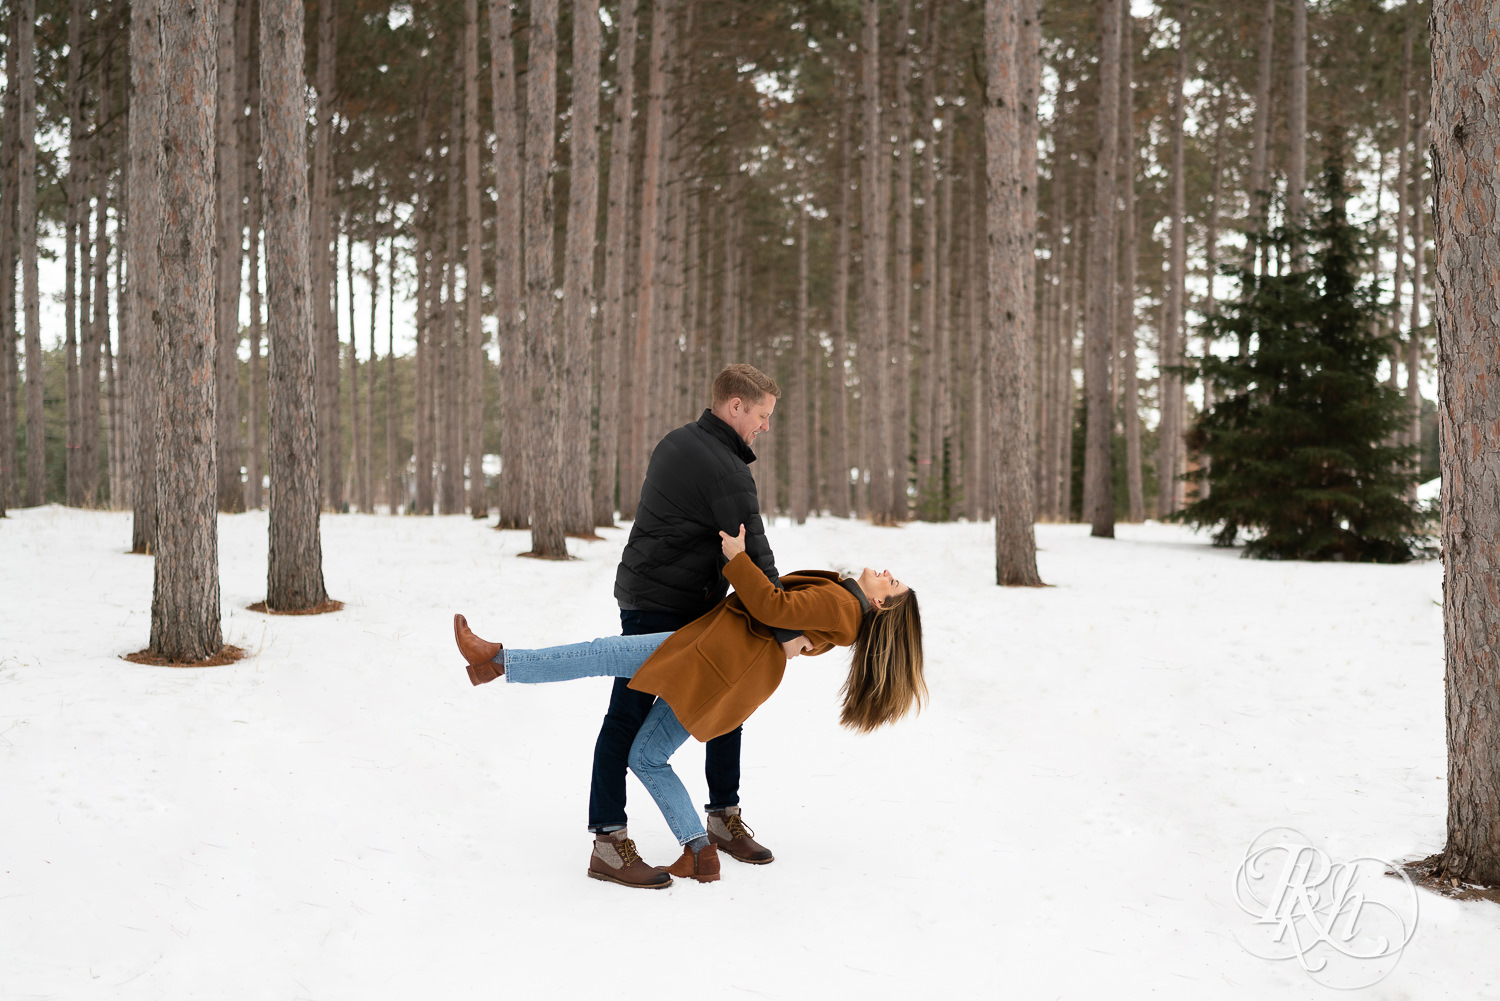 Man and woman laughing in the snow at Hansen Tree Farm in Anoka, Minnesota.